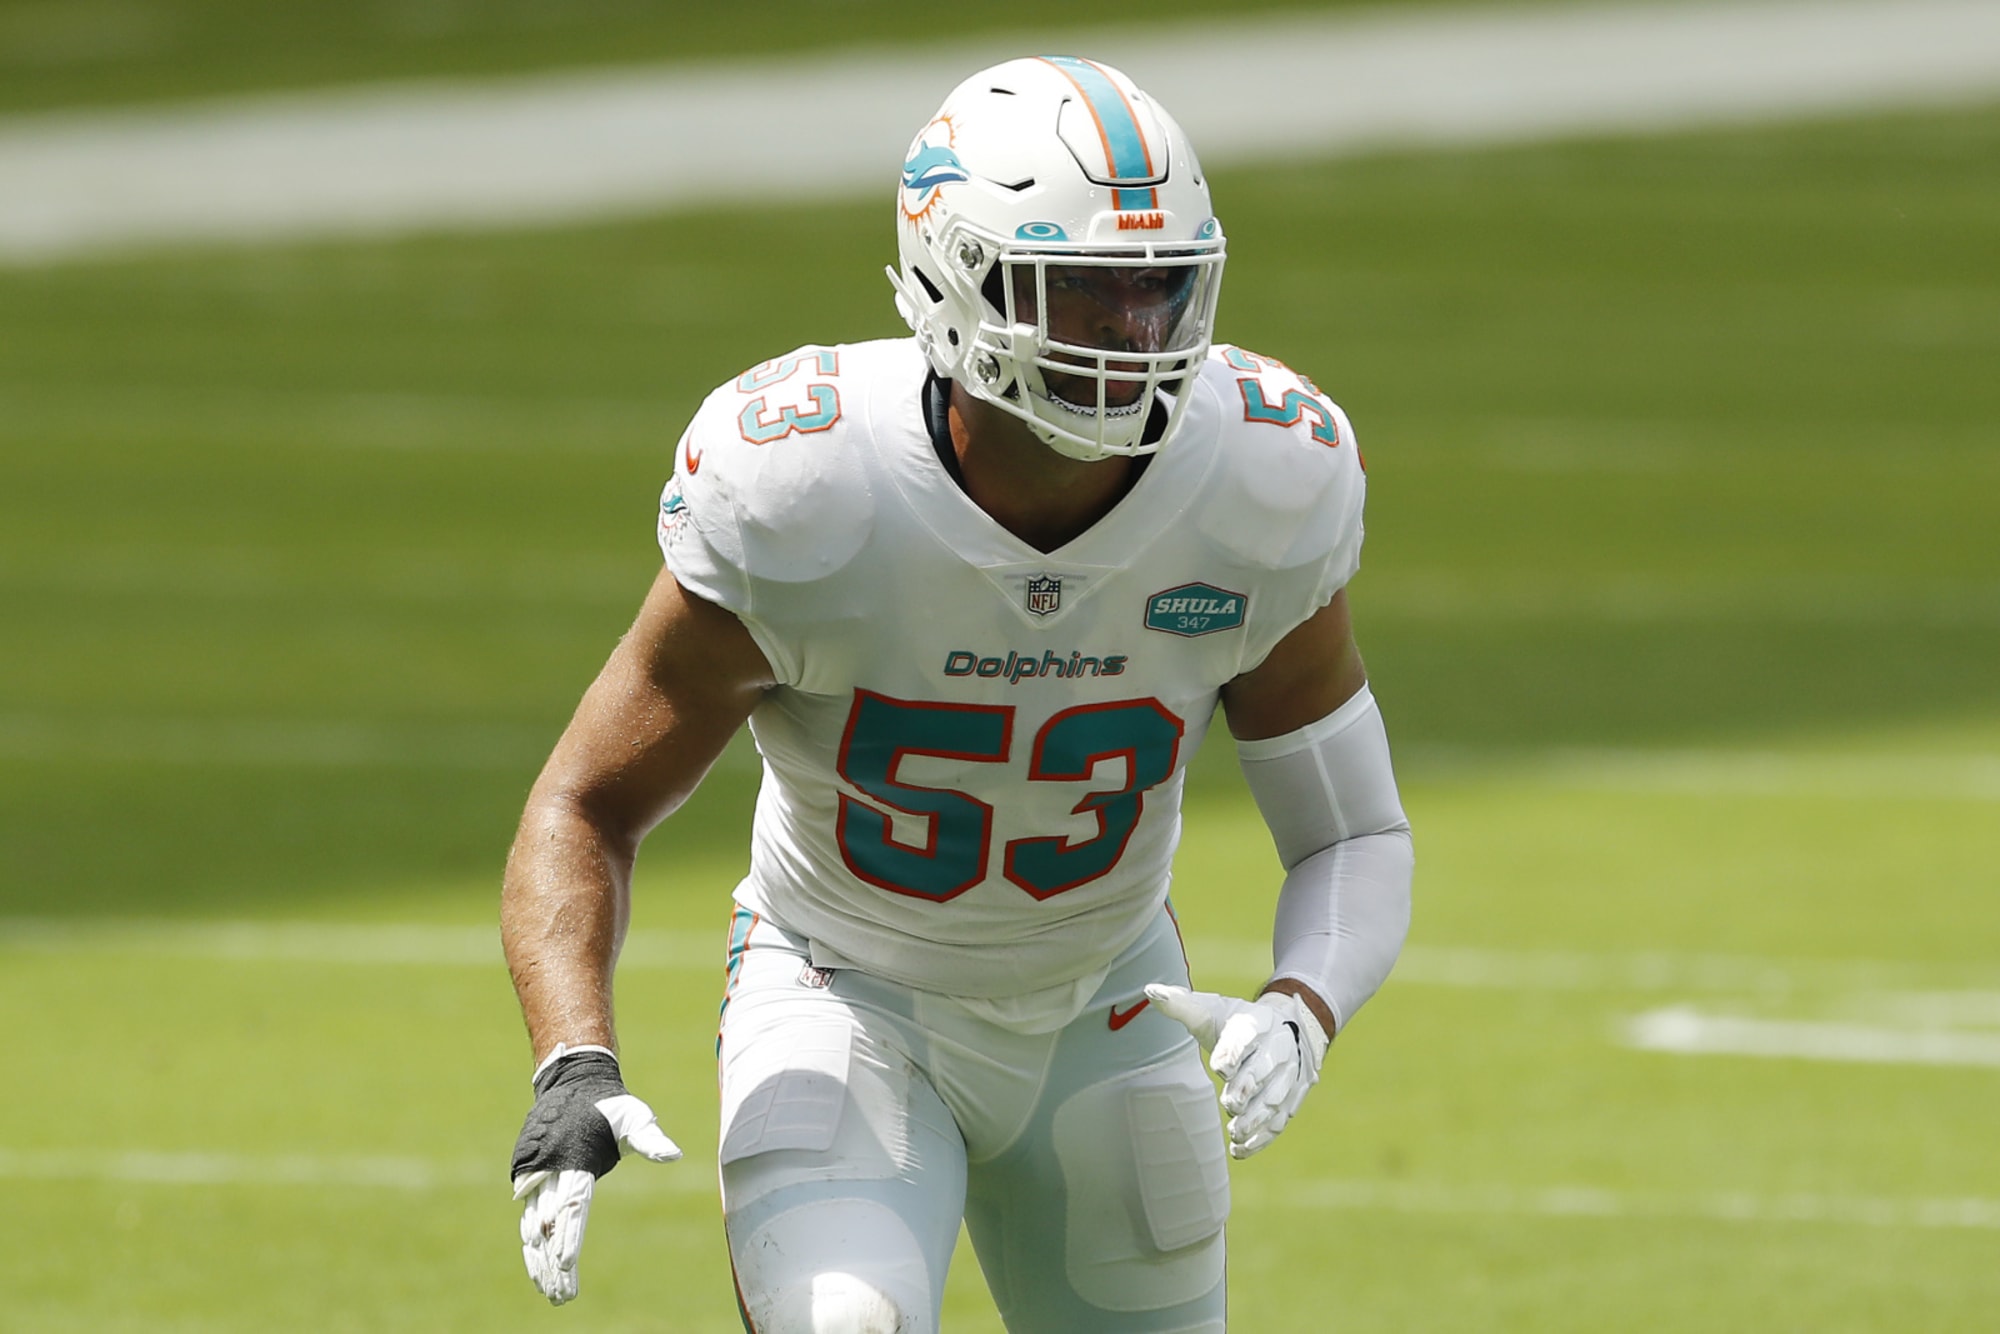 Patriots invite LB Kyle Van Noy back into the crease after only one season with Miami Dolphins